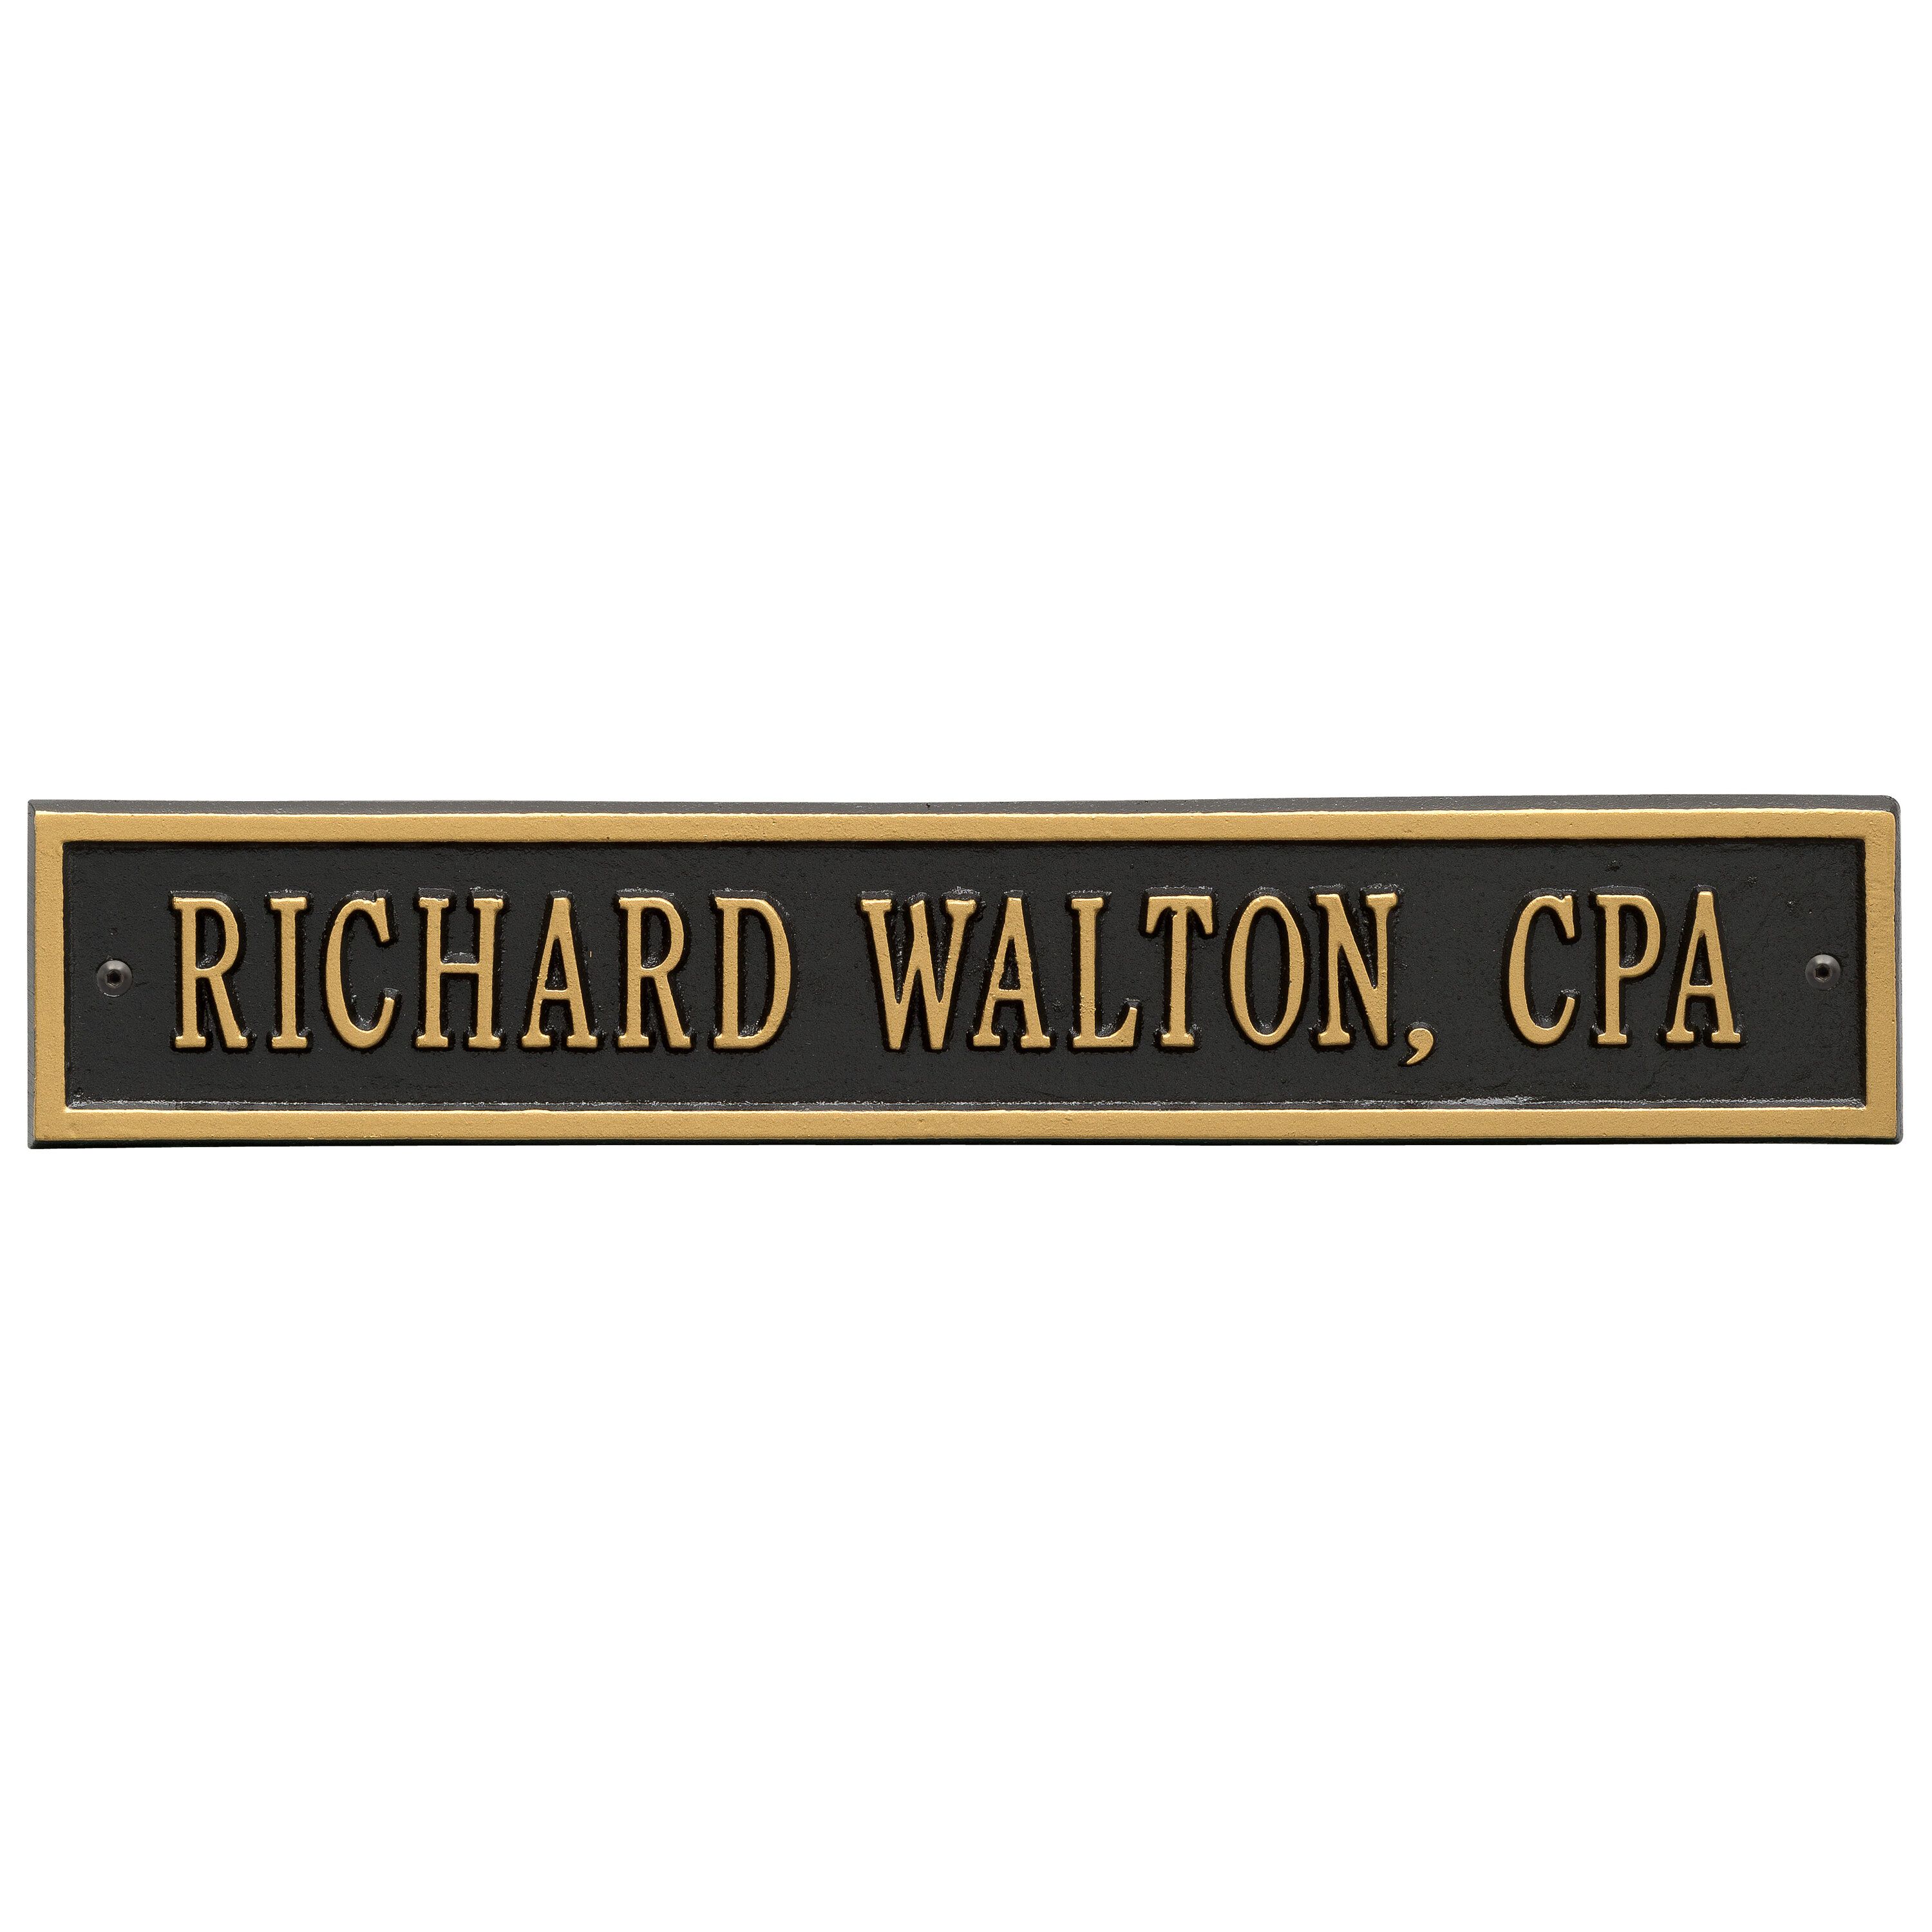 Whitehall Arch Extension - Standard Wall - One Line Address Plaque 